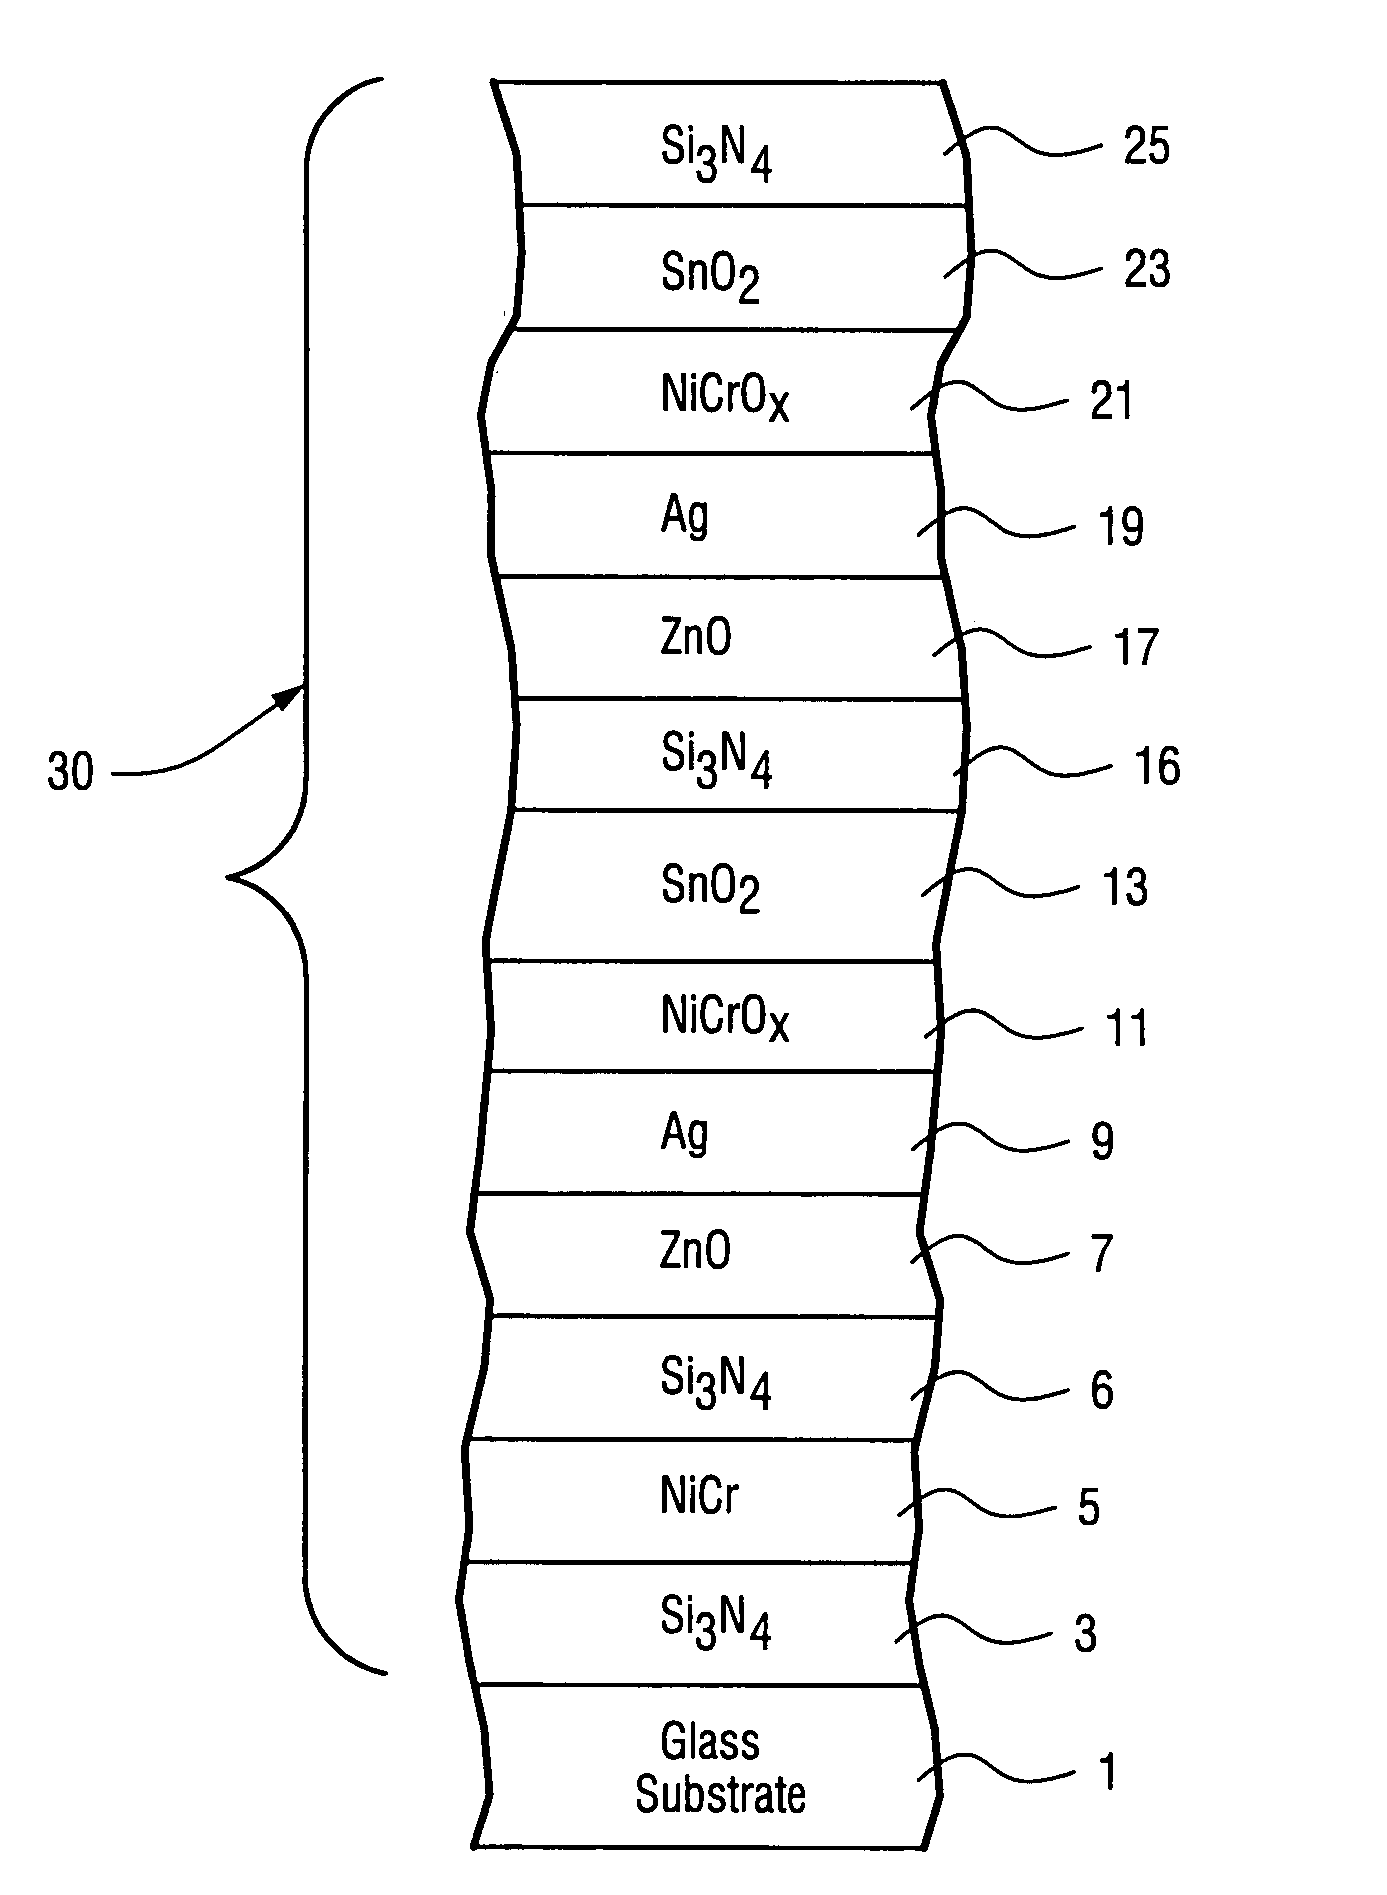 Coated article with absorbing layer